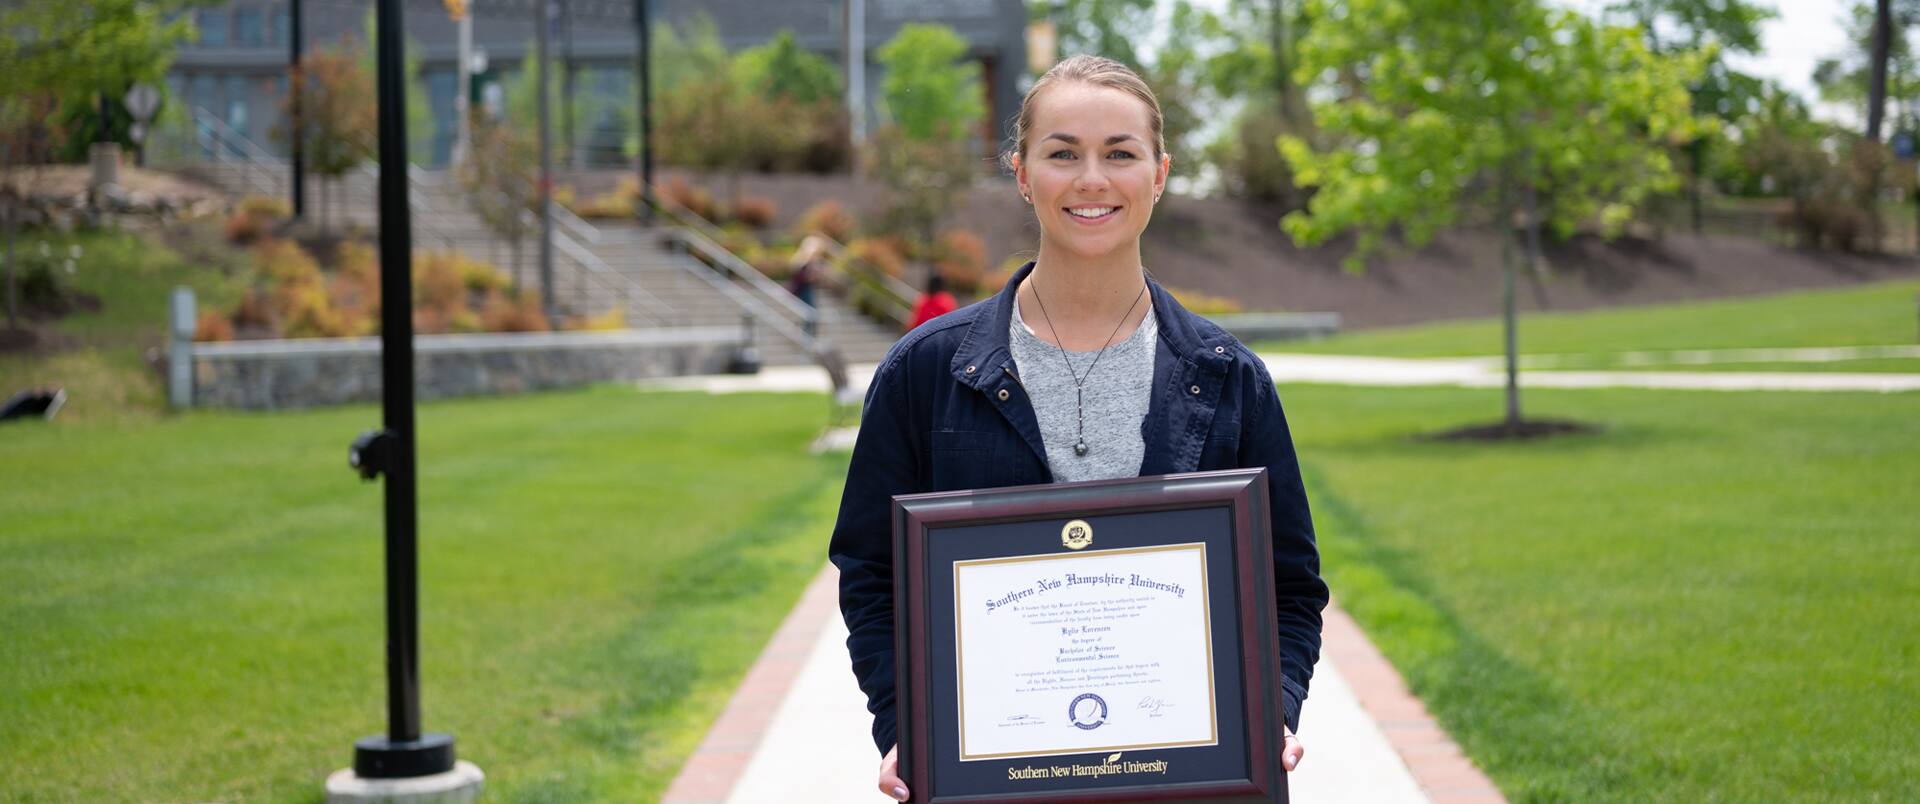 "Kylie Lorenzen, who earned her degree from SNHU in 2019, holding her framed diploma  while standing in the quad on the SNHU campus."